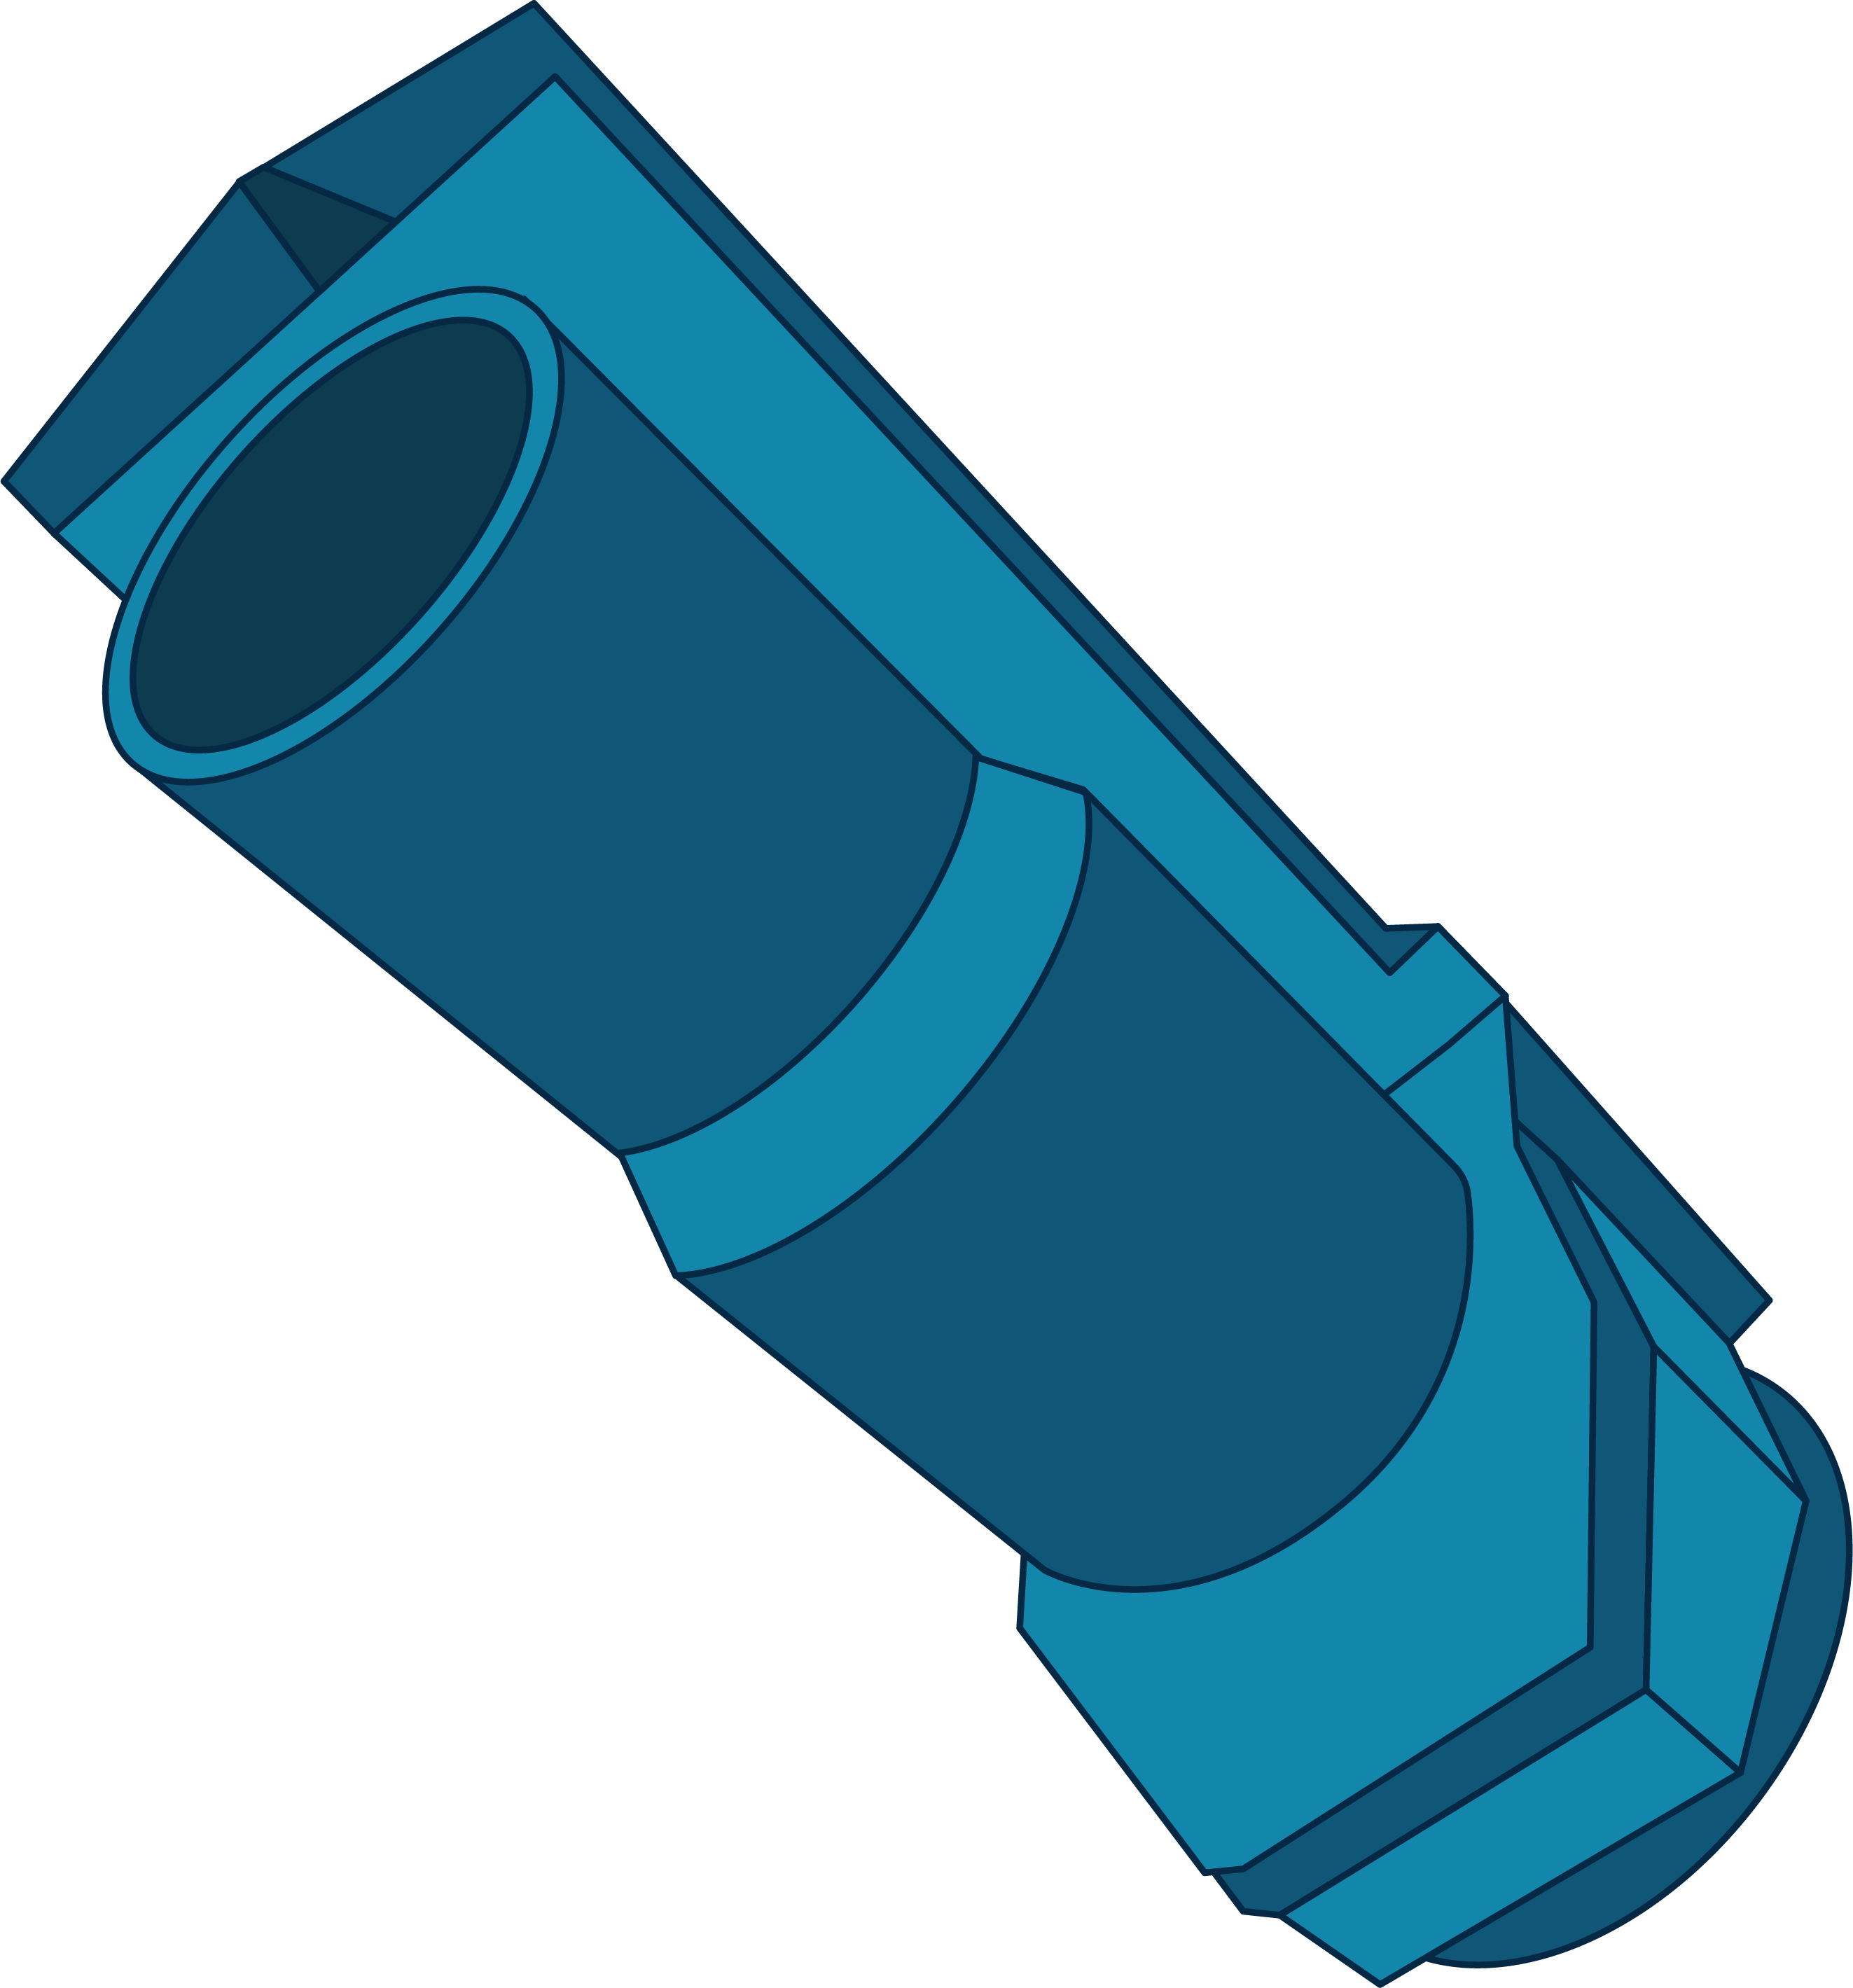 This illustration shows NASA's Spitzer Space Telescope in shades of blue. The main body of the observatory is cylindrical with an open top and a large piece containing the observatory's solar array on a panel on the telescope's back.